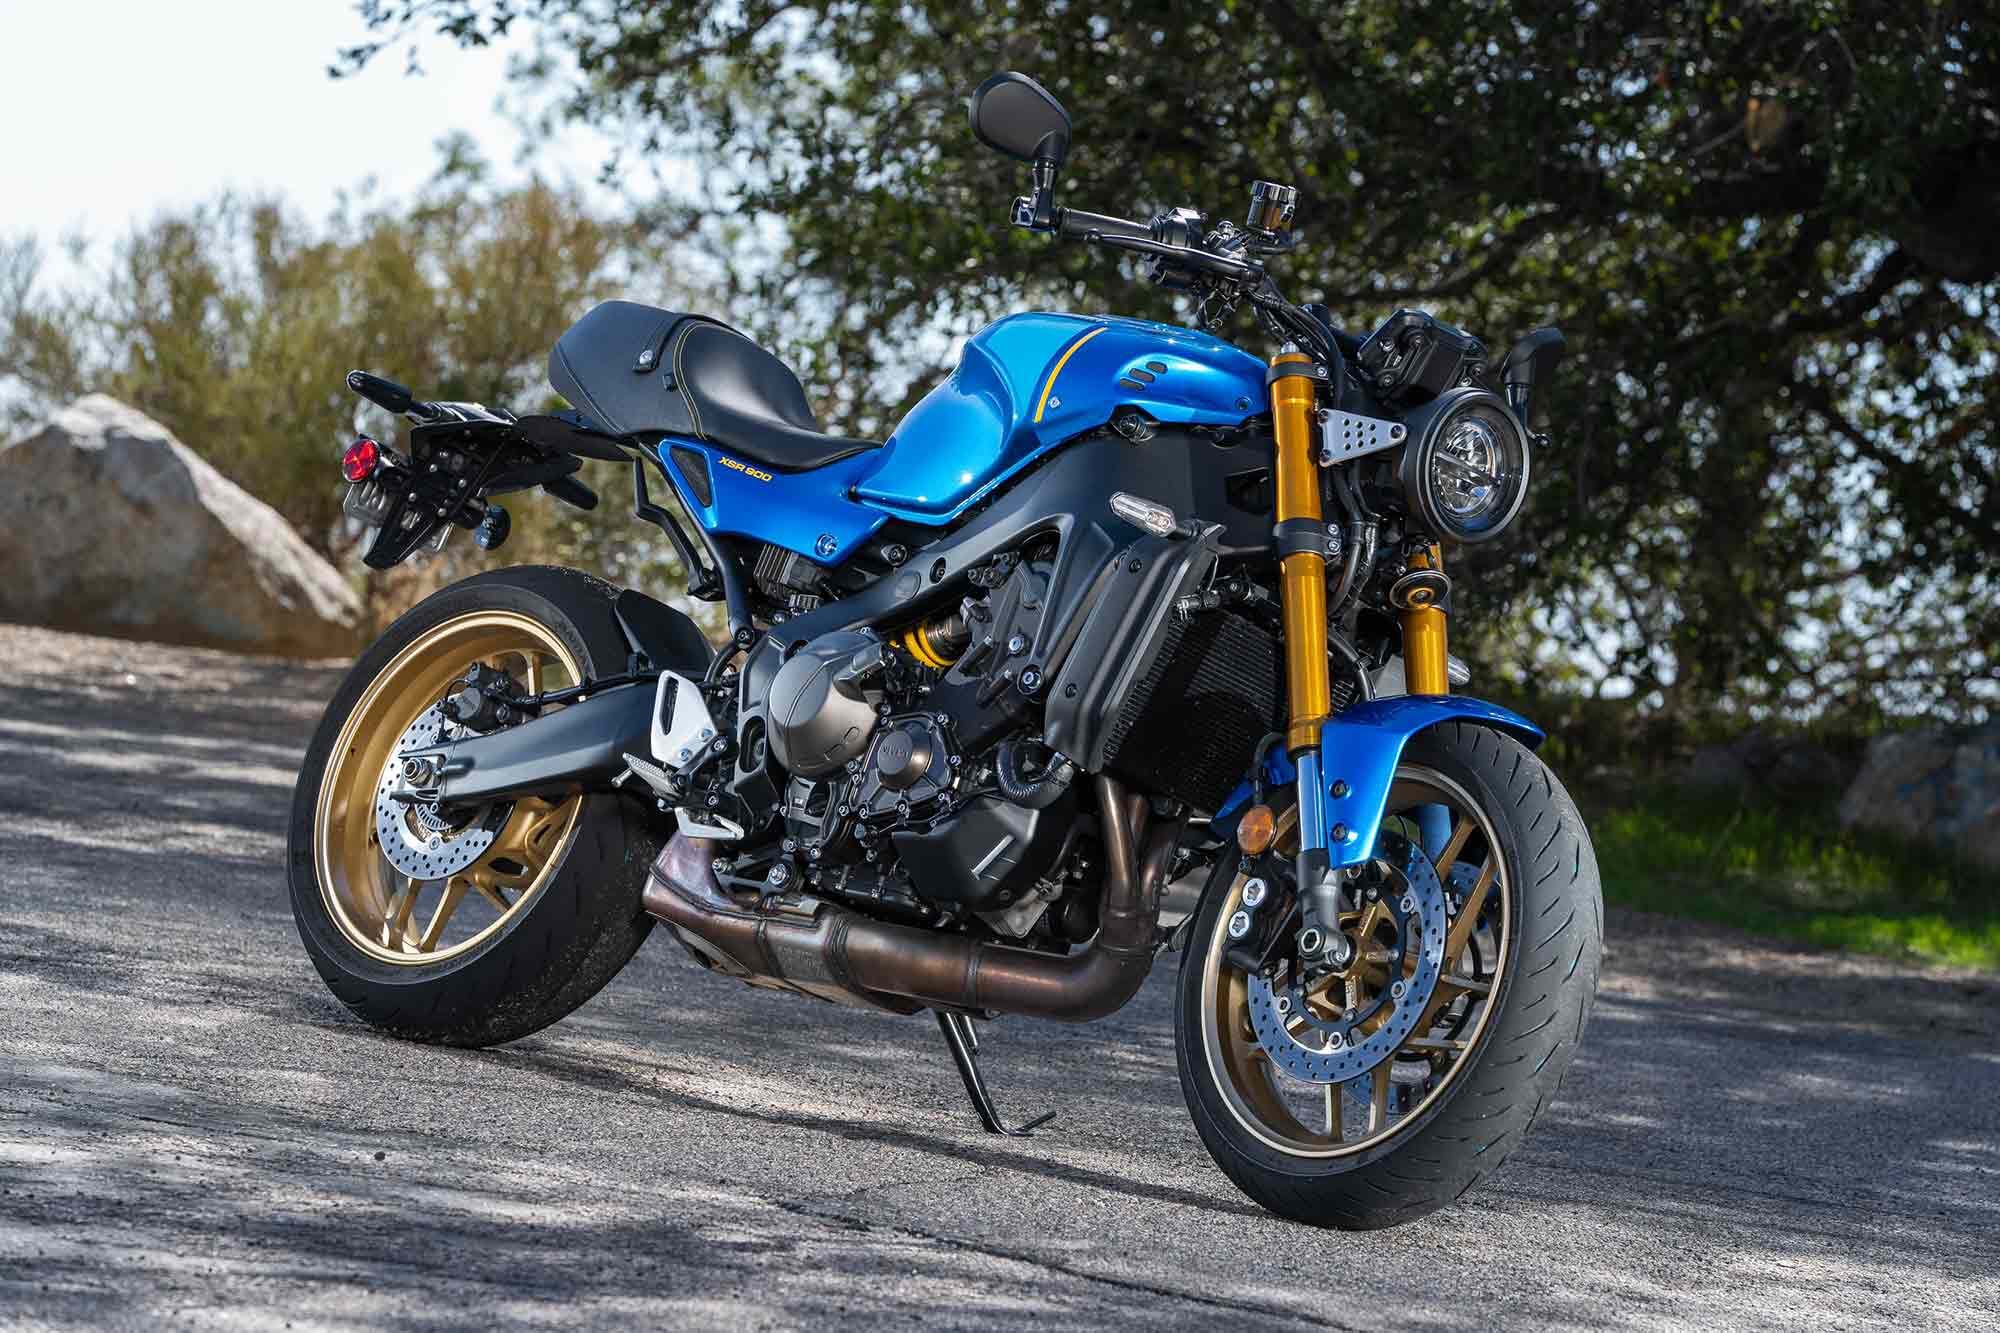 Yamaha’s 2022 XSR900 ($9,999) is based off of the new-for-2021 MT-09 naked.